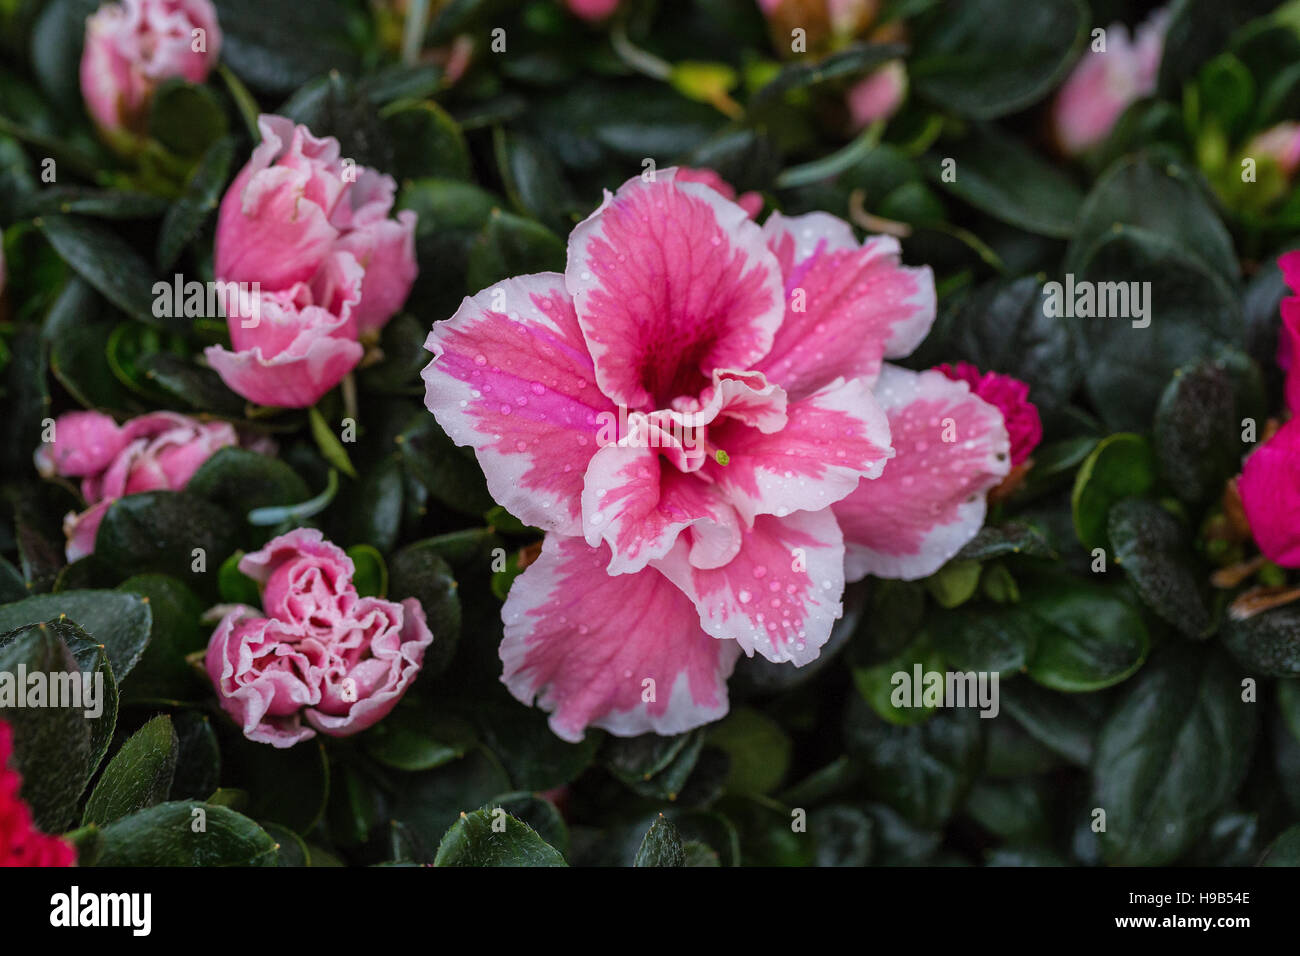 Pink and white crinkle-edged flowers in shrub with waxy green leaves Stock Photo